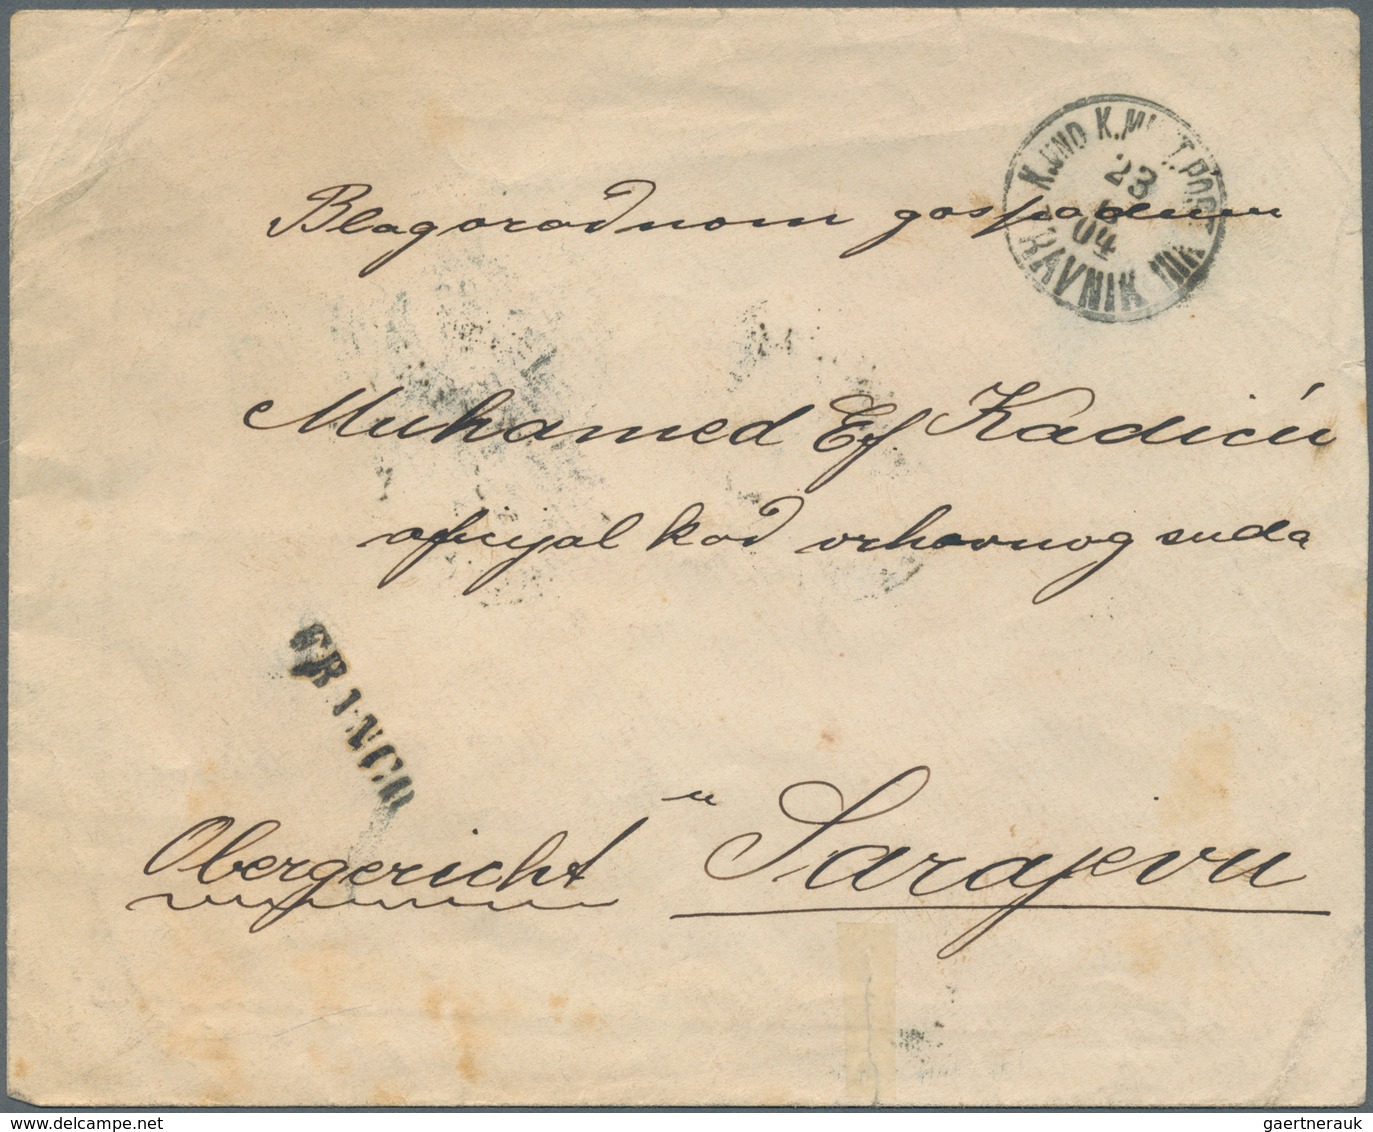 Bosnien Und Herzegowina (Österreich 1879/1918): 1904, Cover With Tears And Stains To Sarajevo Despat - Bosnia And Herzegovina